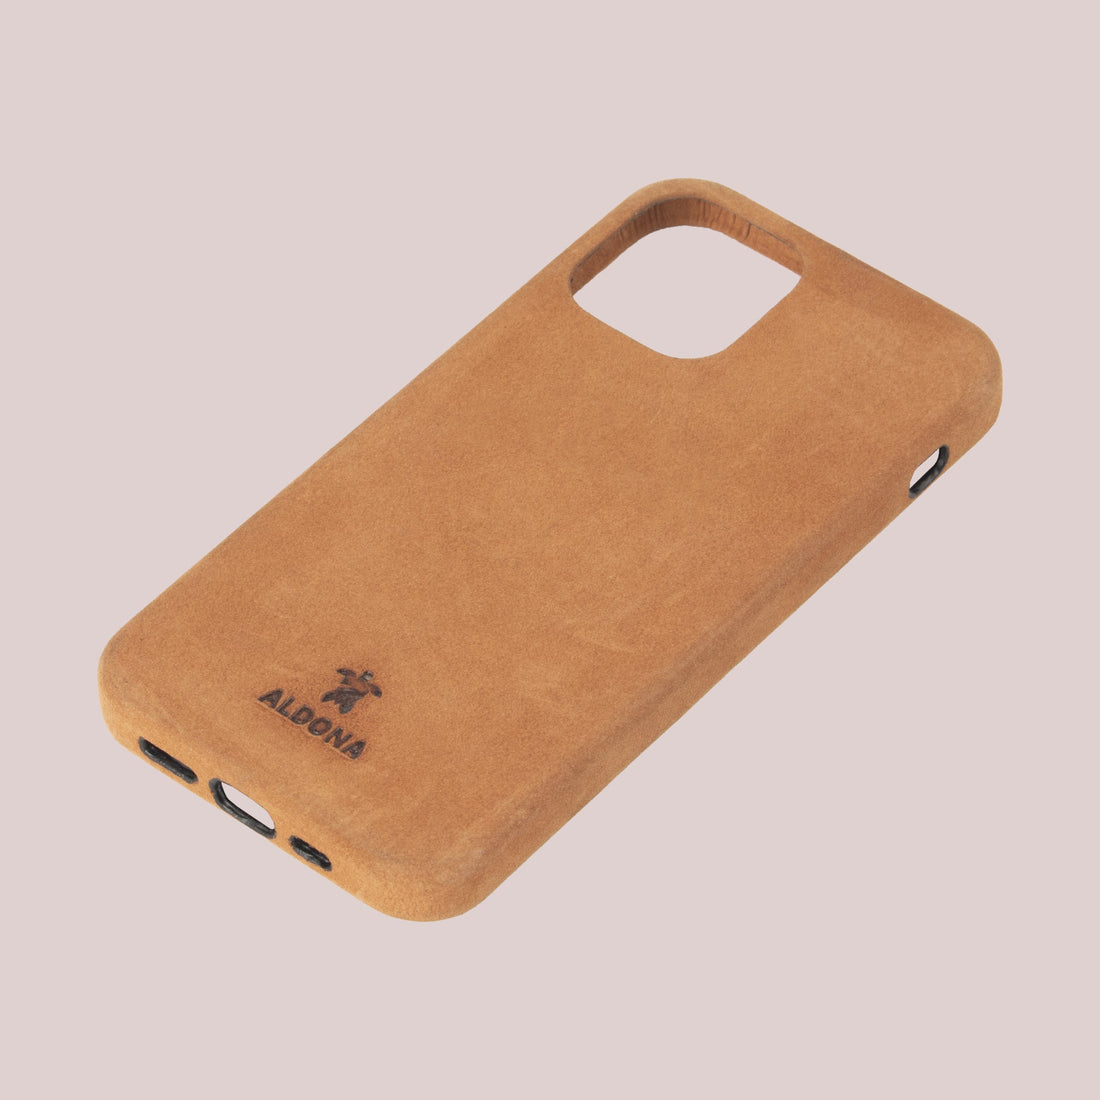 Kalon Case for iPhone 13 Pro with MagSafe Compatibility - Cognac